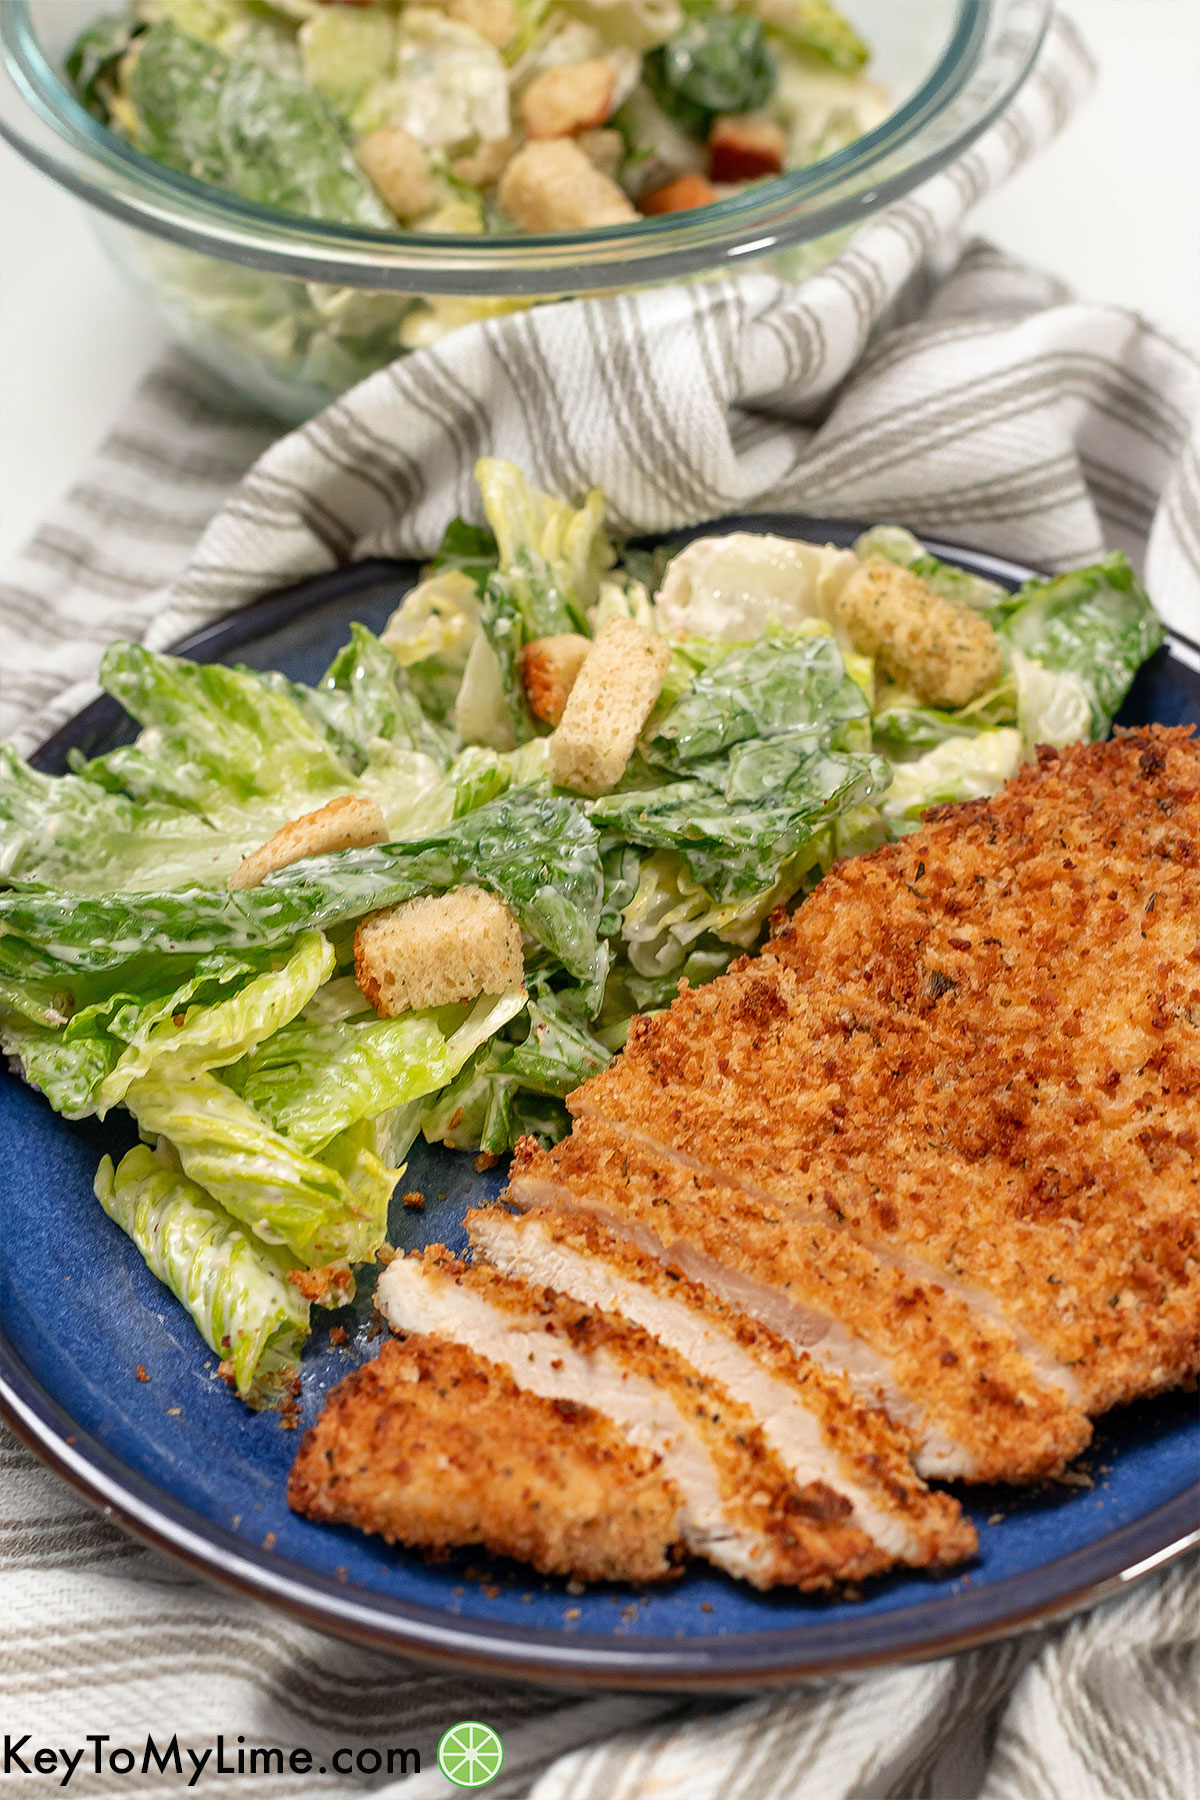 A side shot of a sliced crispy chicken cutlet showing the inside texture.